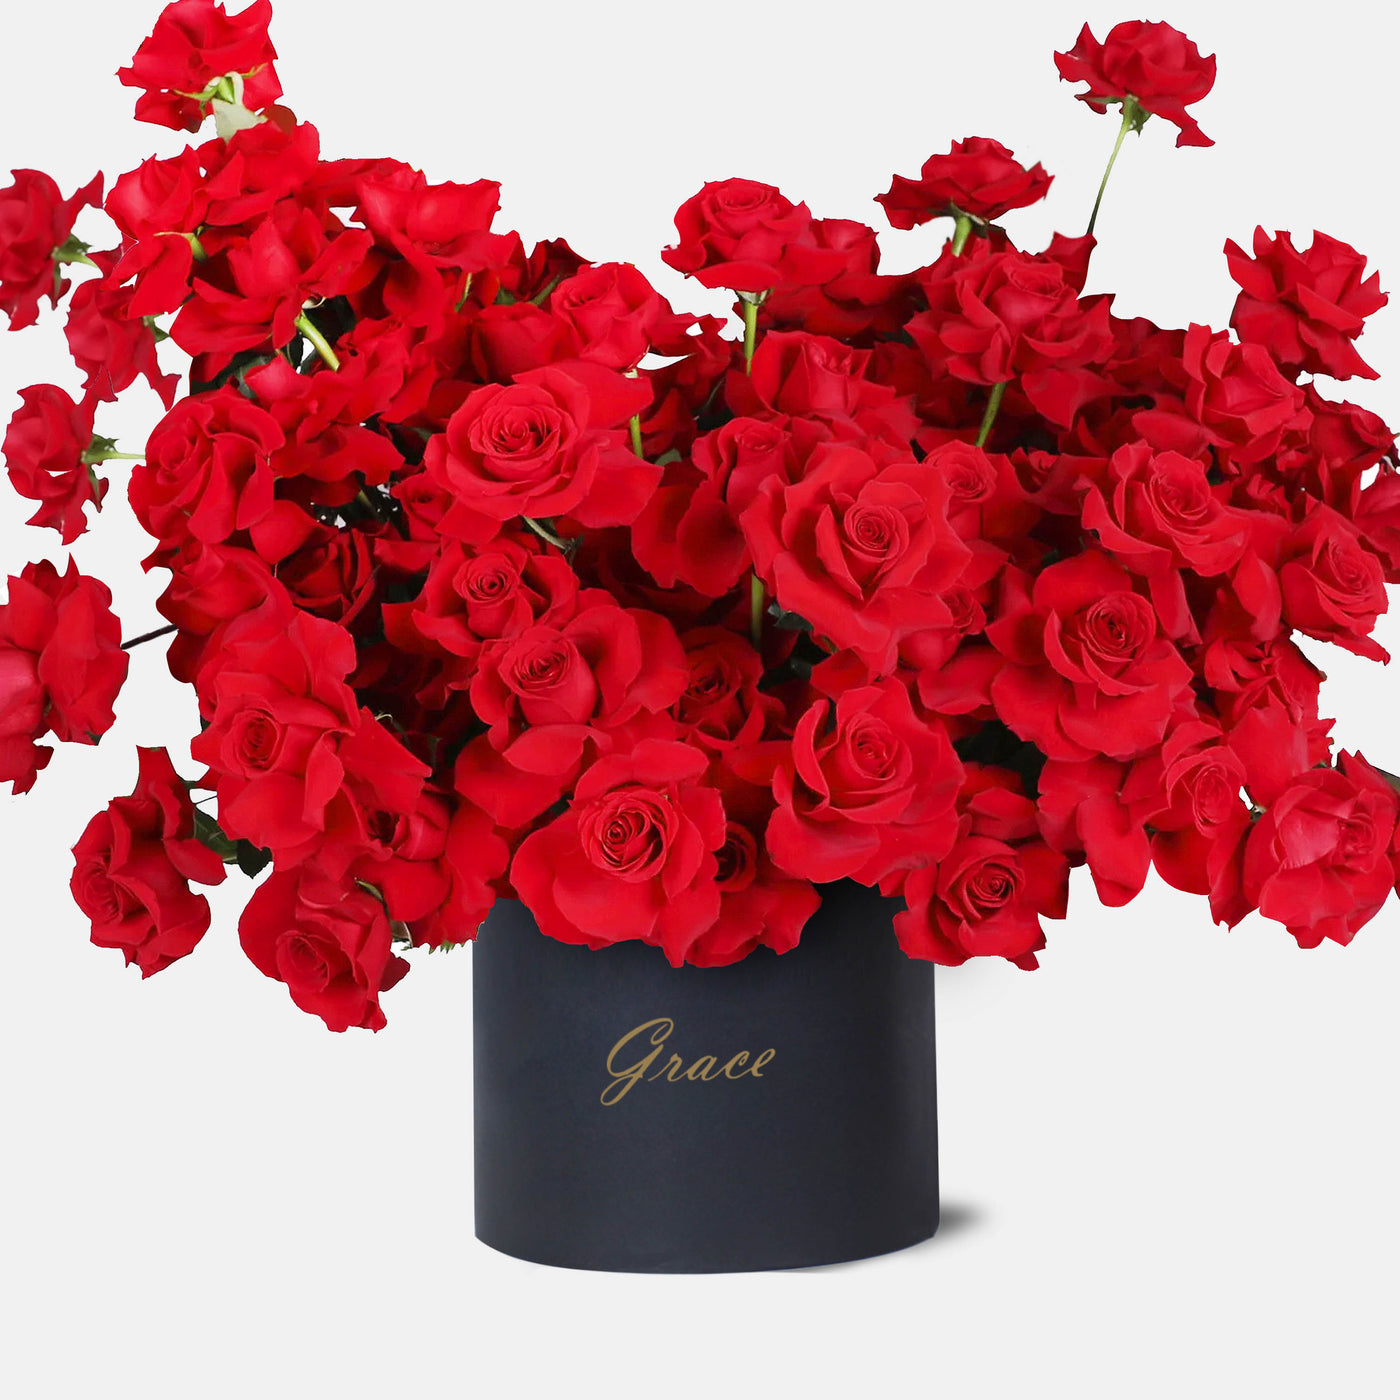 100 Red Roses in Box